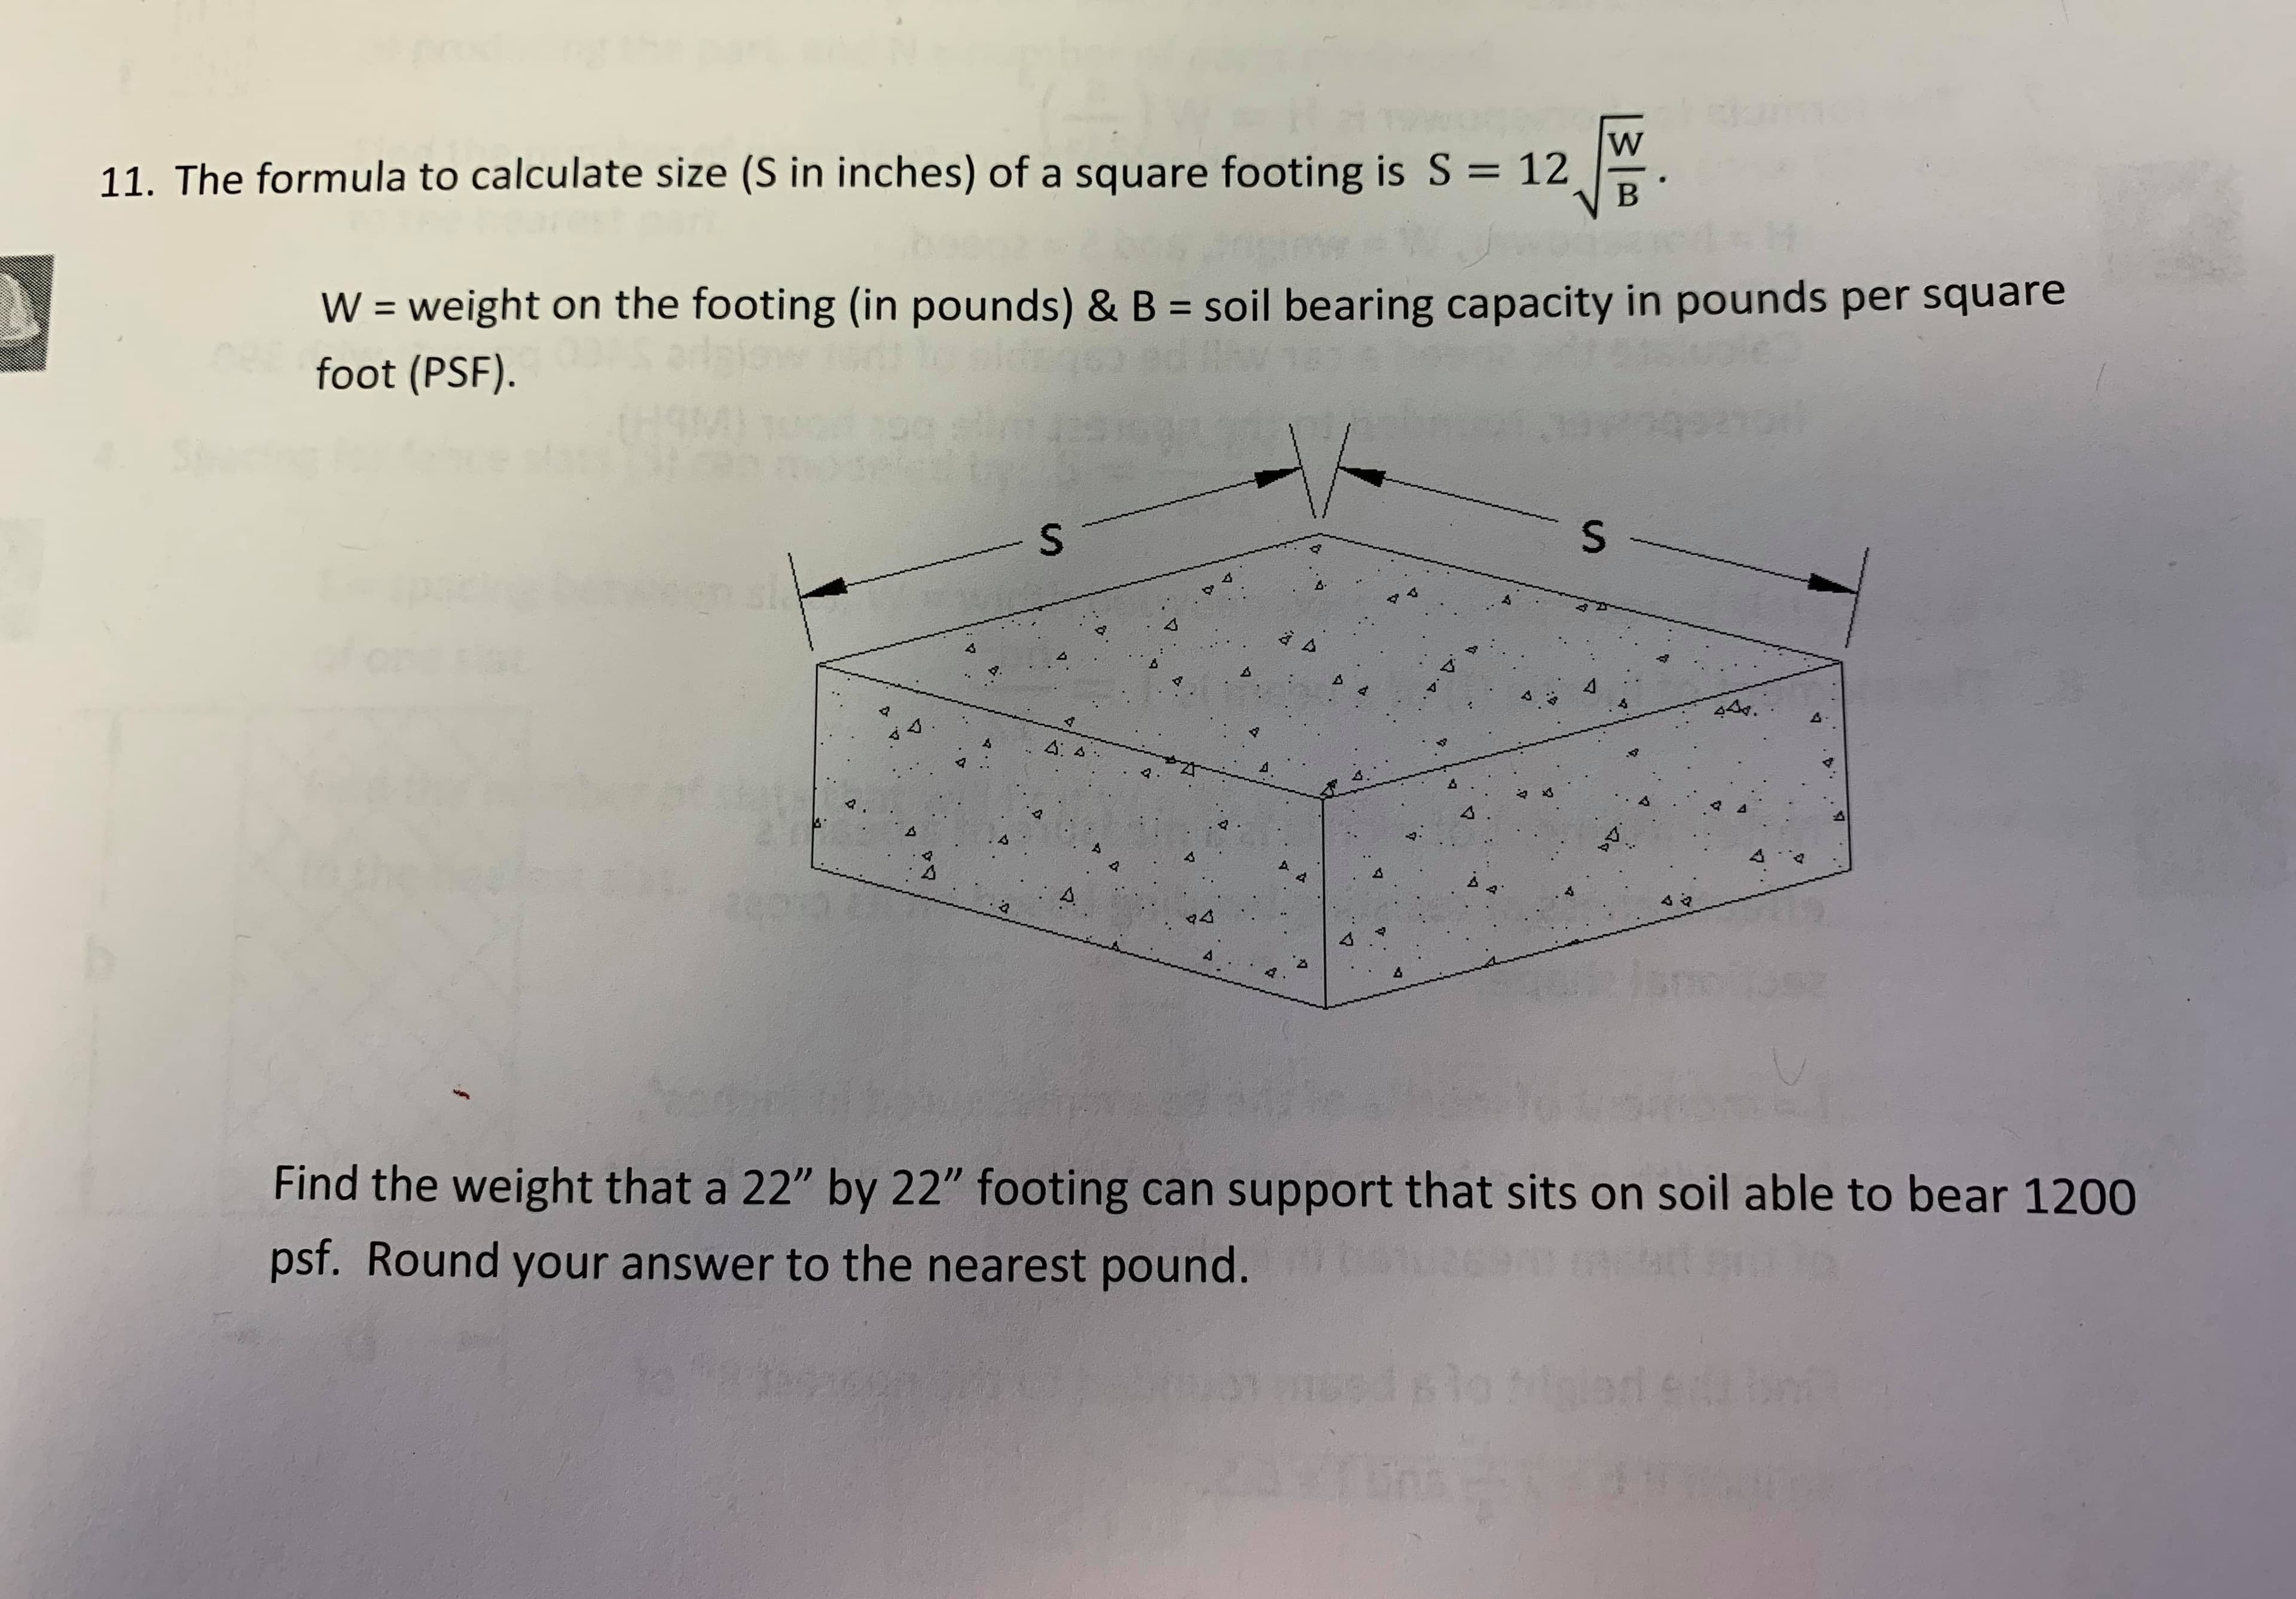 W
B
11. The formula to calculate size (S in inches) of a square footing is S = 12
soil bearing capacity in pounds per square
W= weight on the footing (in pounds) & B
foot (PSF).
S
A
4
44
4
4
A
94
Find the weight that a 22" by 22" footing can support that sits on soil able to bear 1200
psf. Round your answer to the nearest pound.
mod plo tipled
S
